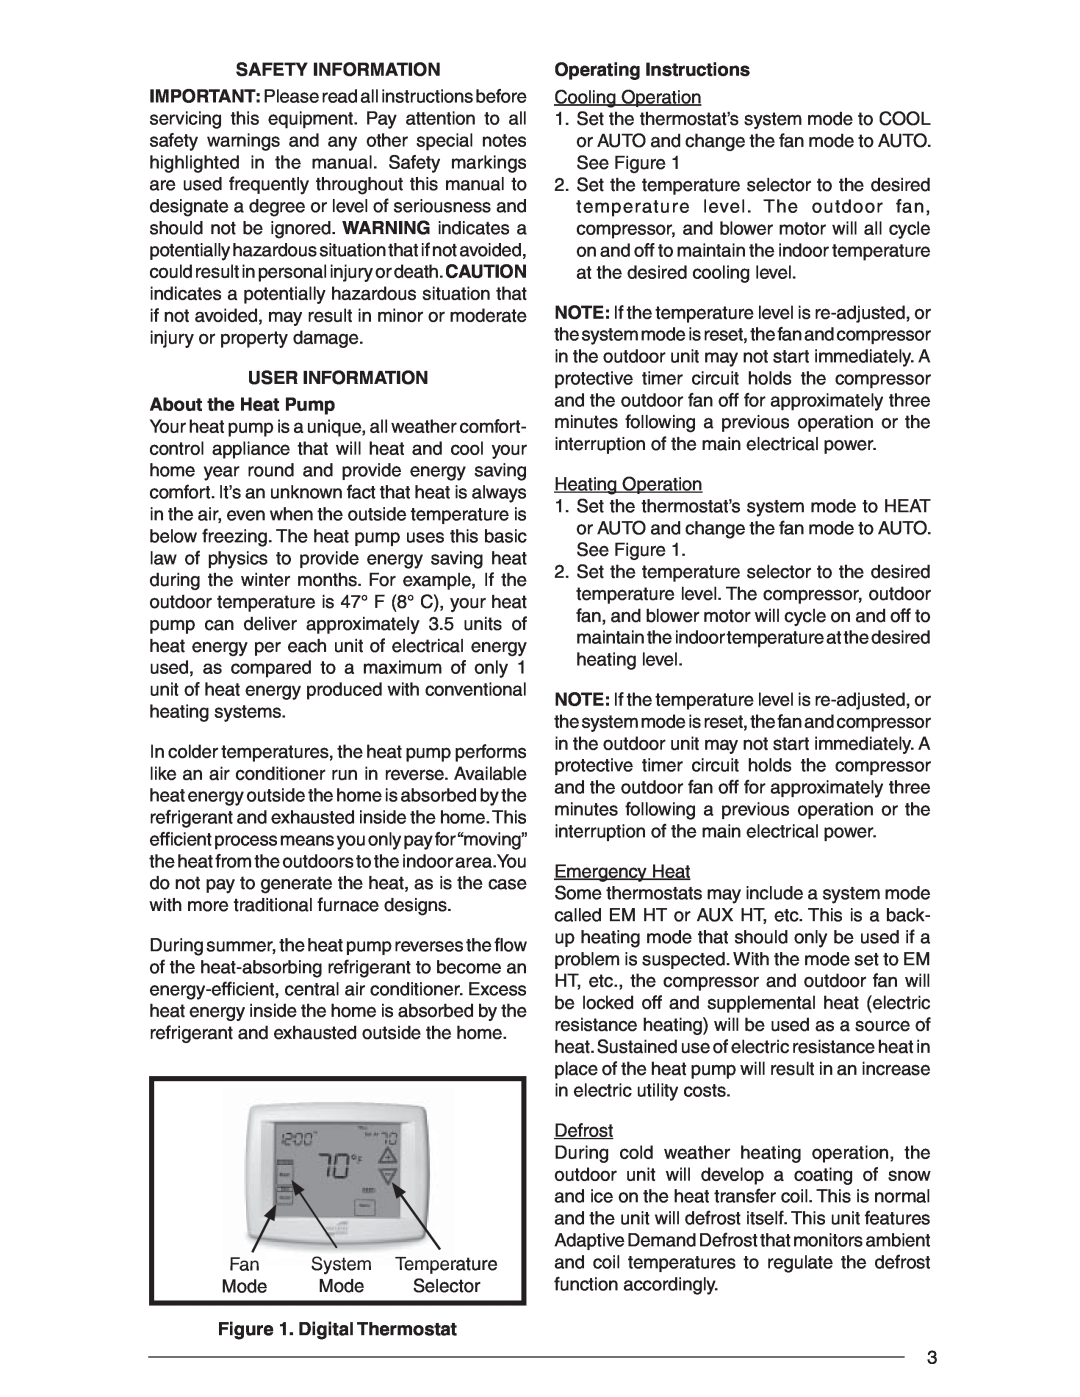 Nordyne R-410A Safety Information, USER INFORMATION About the Heat Pump, Digital Thermostat, Operating Instructions 